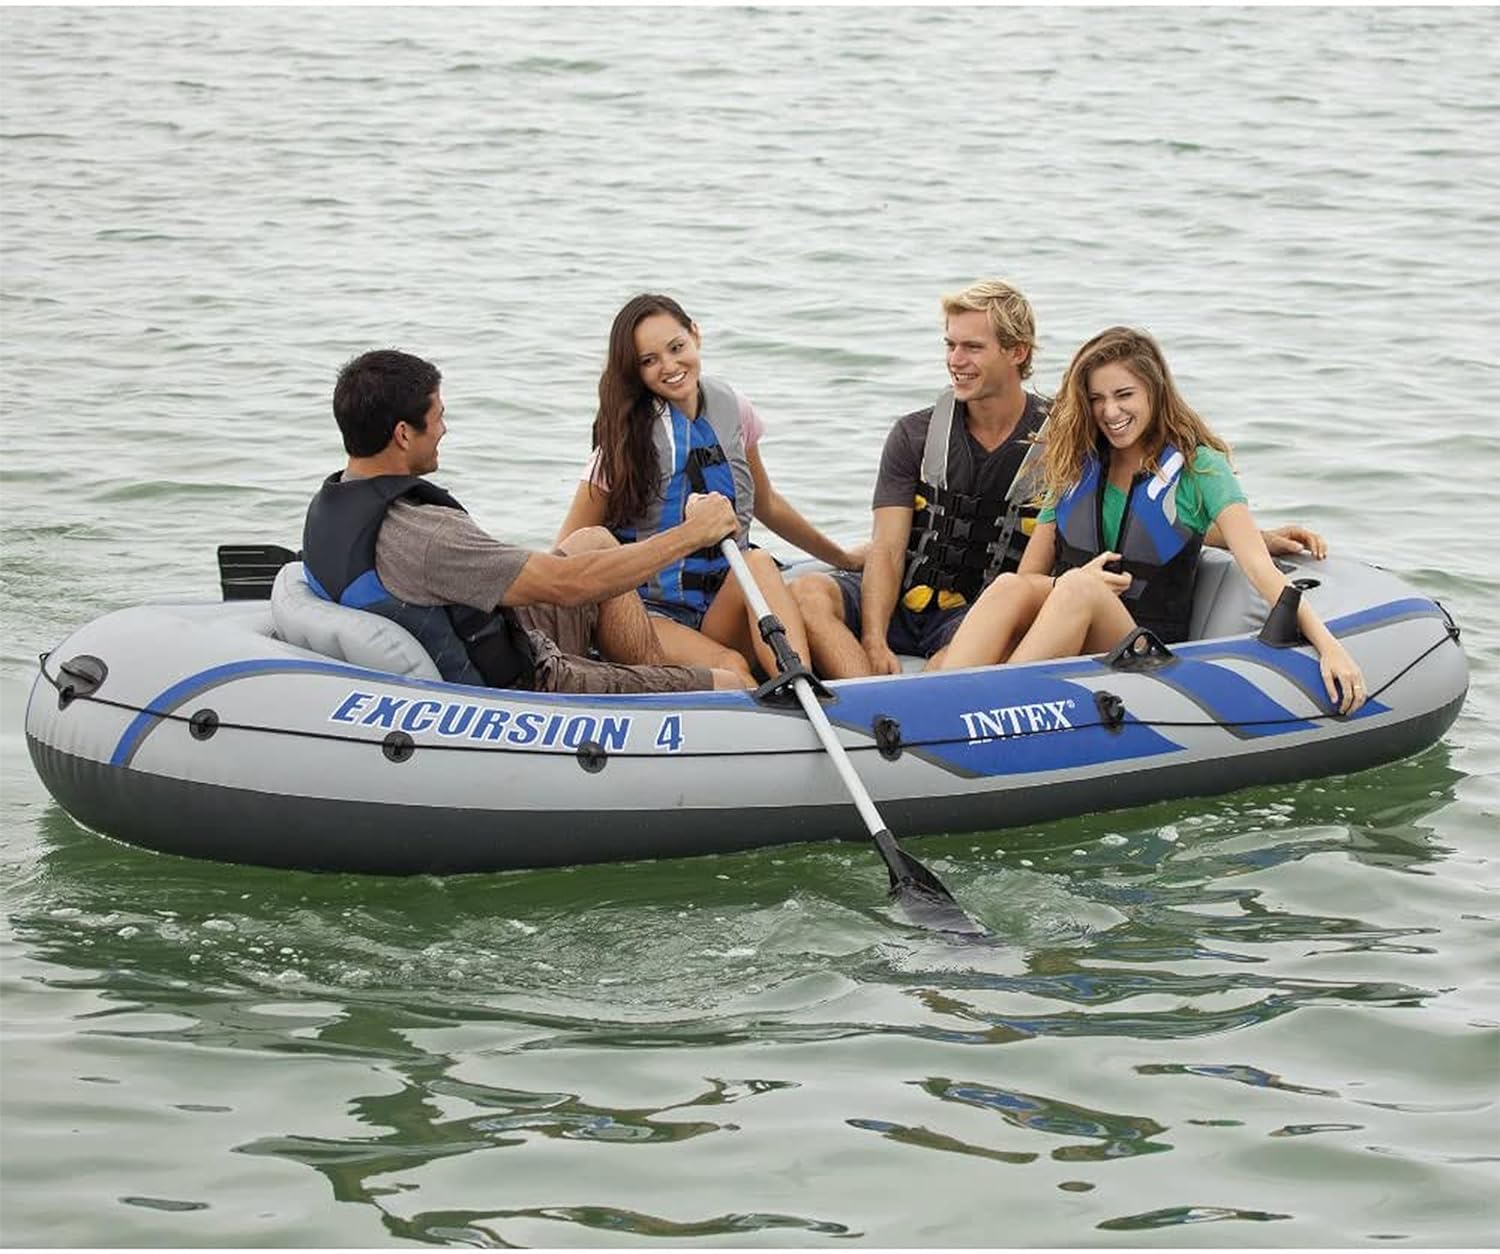 INTEX Excursion Inflatable Boat Series: Includes Deluxe 54in Aluminum Oars and High-Output Pump – SuperStrong PVC – Adjustable Seats with Backrest – Fishing Rod Holders – Welded Oar Locks - INTEX Excursion Inflatable Boat Series: Deluxe 54in Aluminum Oars Review